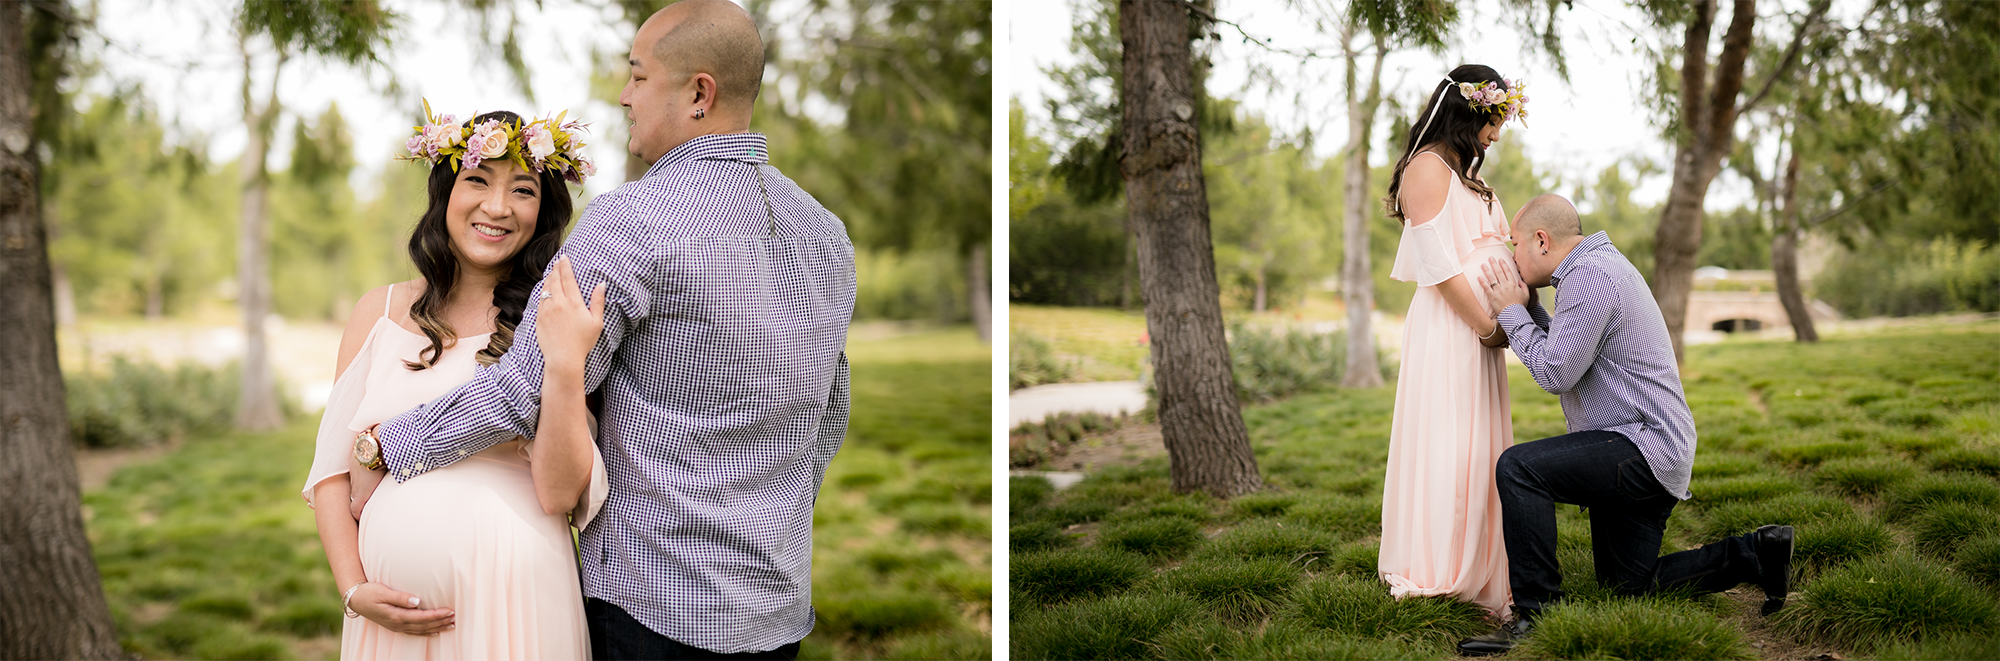 6-JC-Jeffrey-Open-Space-Trail-Maternity-Shoot-Andrew-Kwak-Photography.png